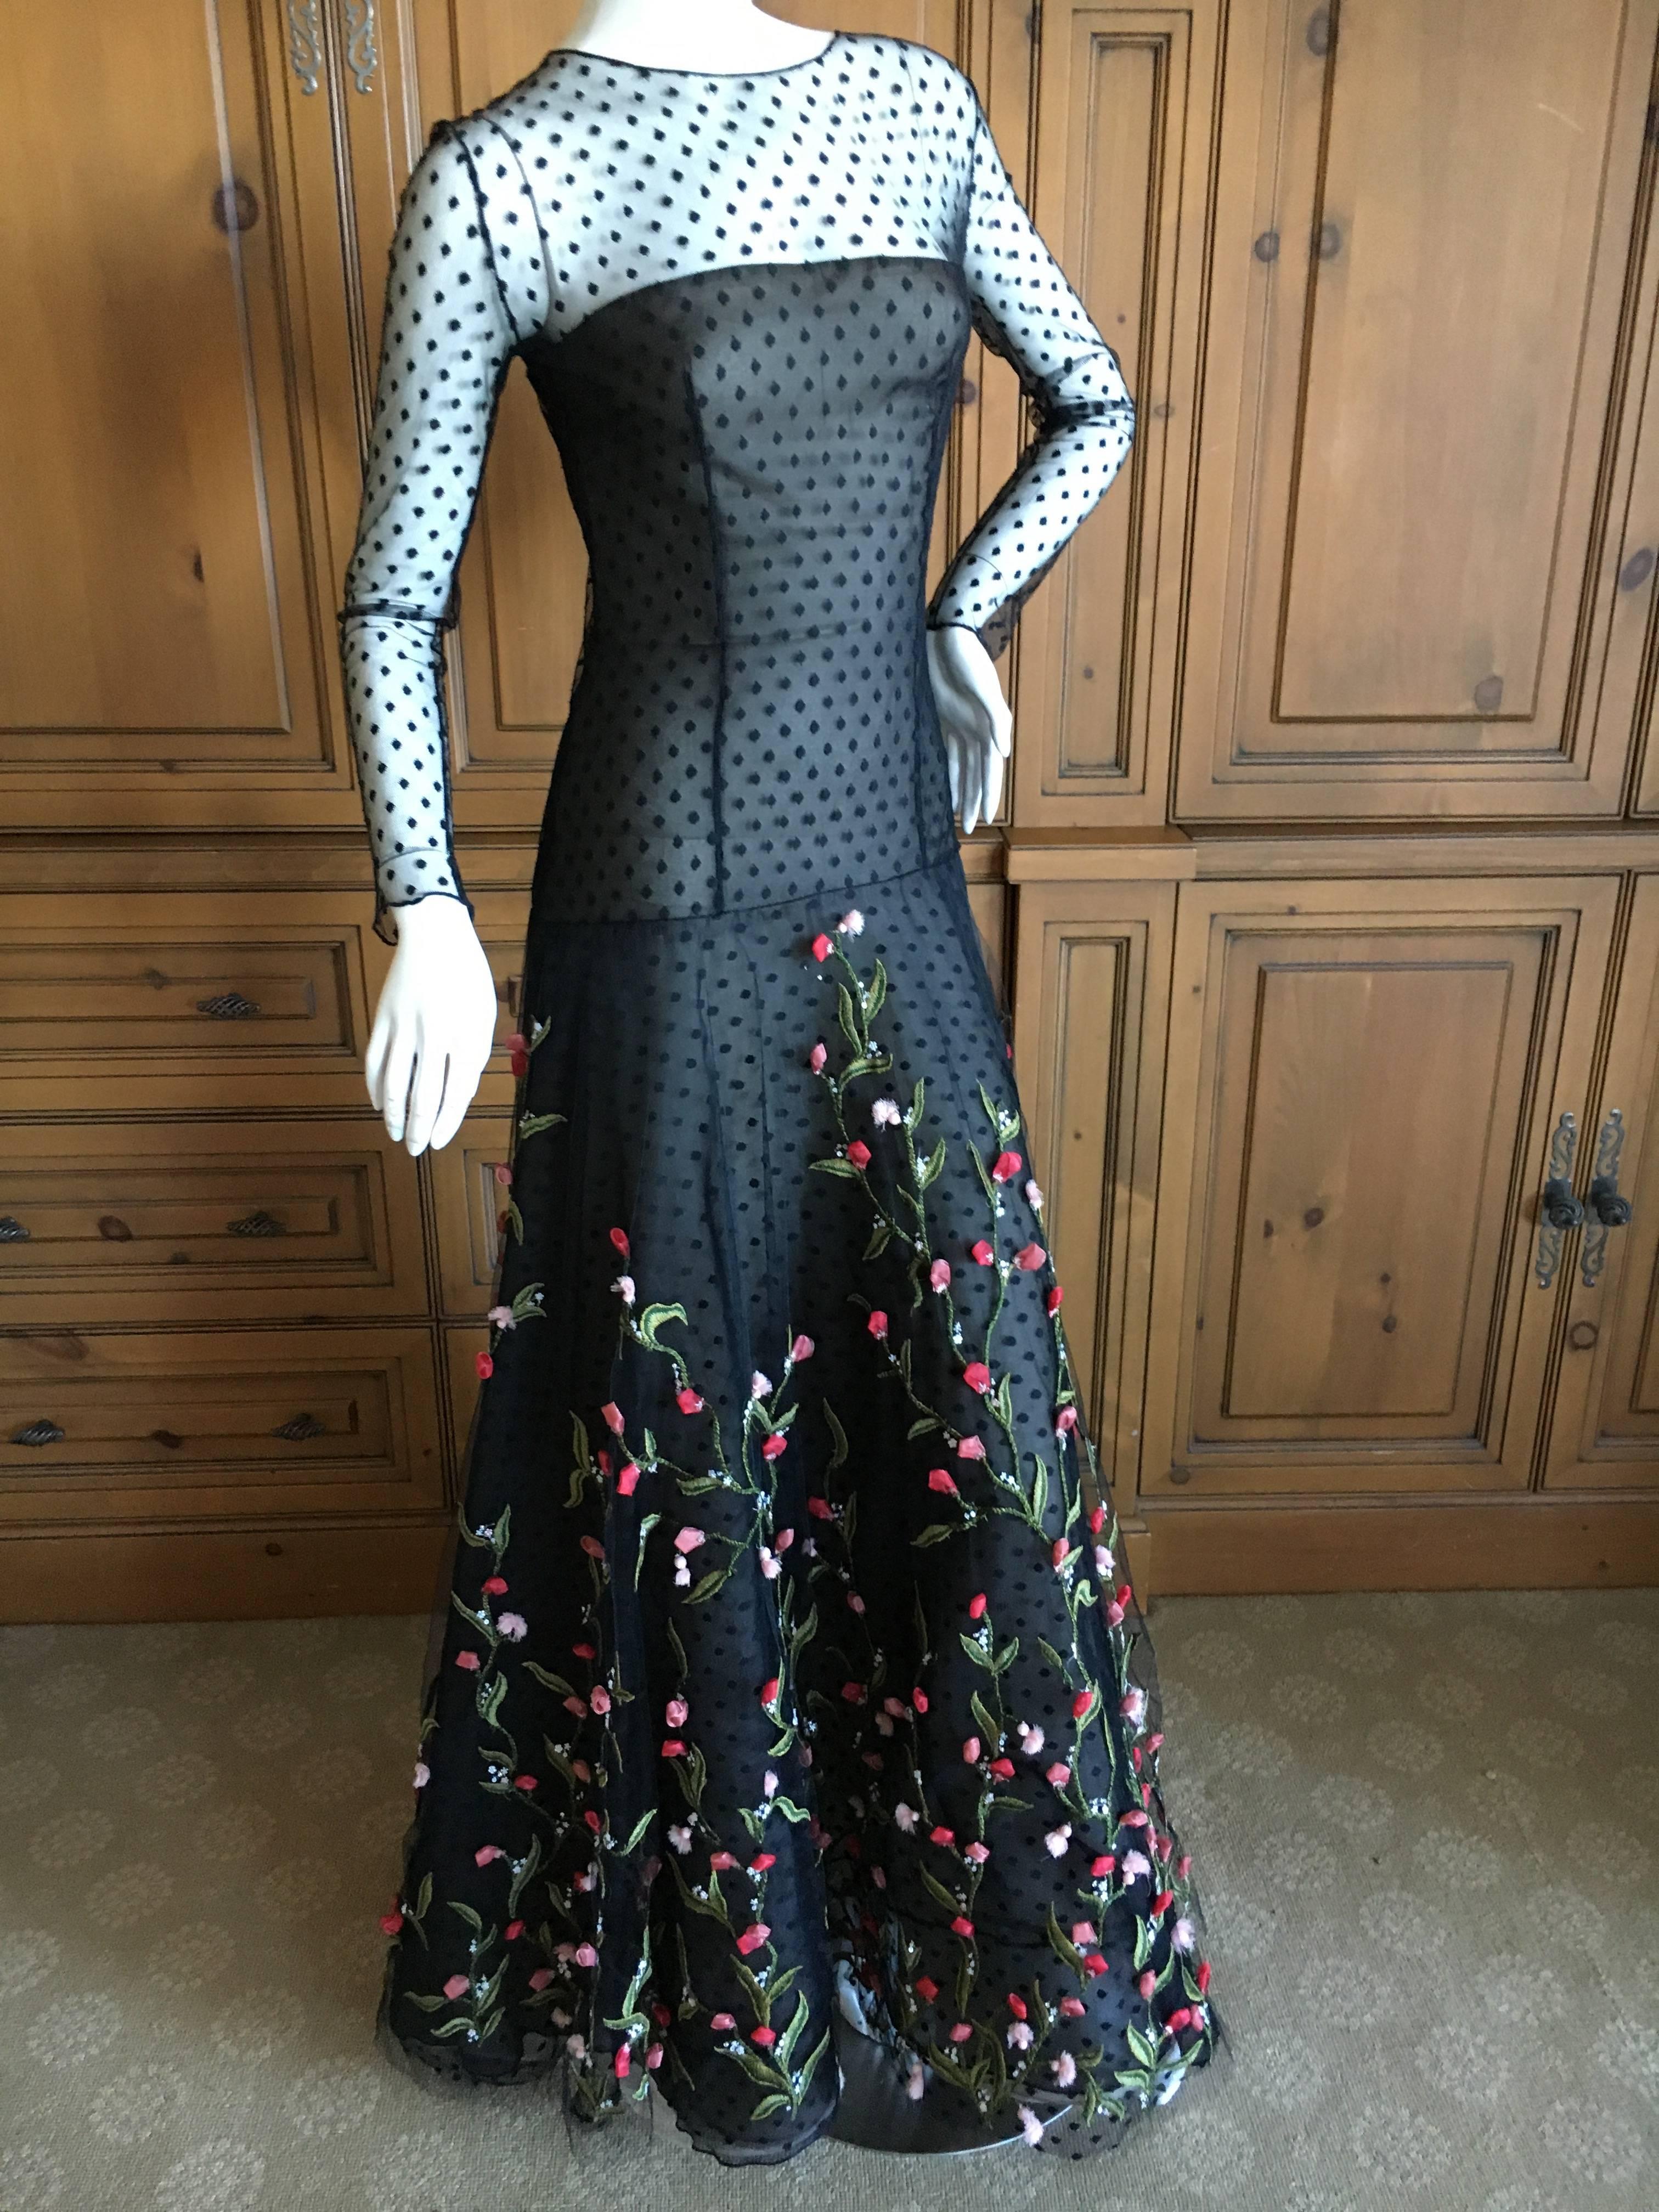 Oscar de la Renta Romantic Rose Floral Embellished Sheer Lace Evening Dress.
This is such a pretty dress, the photos don't do it justice .
Bust 34"
Waist 24"
Hips 42"
Length 59"